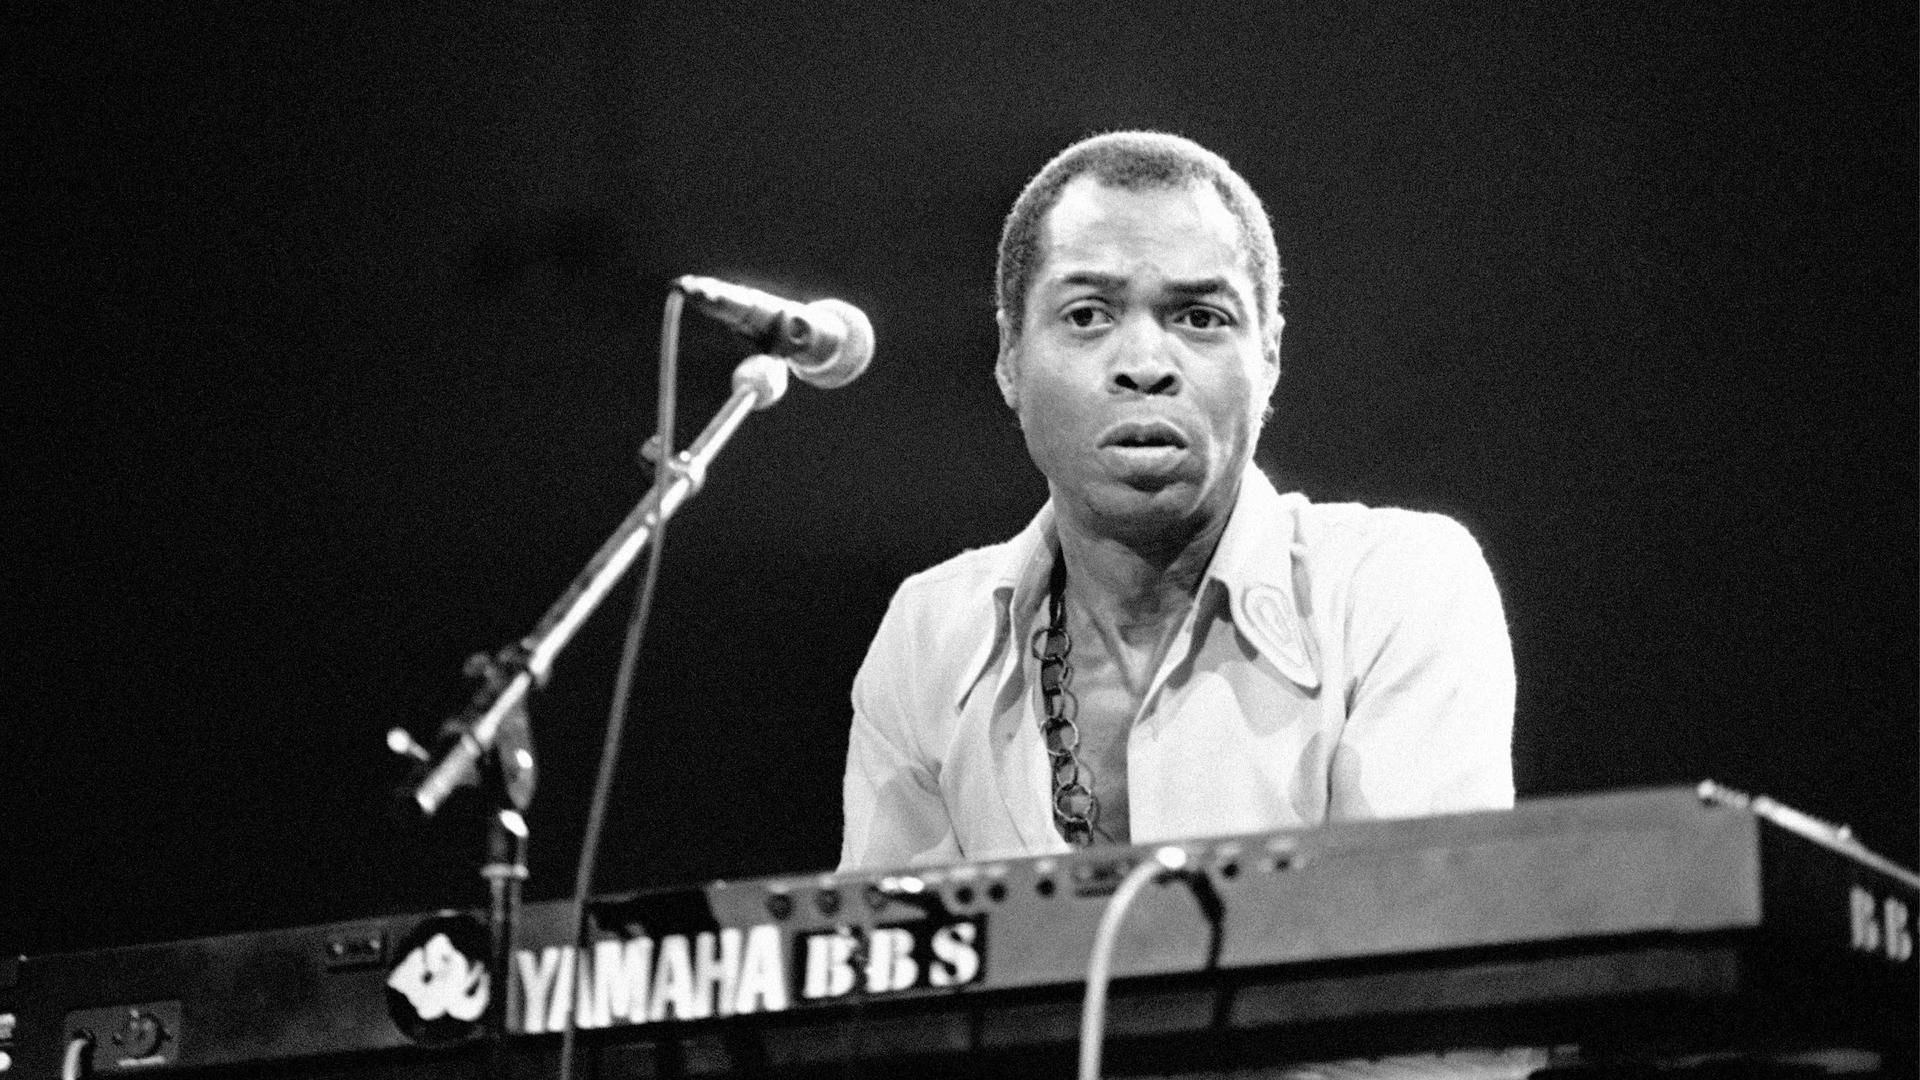 Fela Kuti is shown playing an electric keyboard and standing behind a microphone.